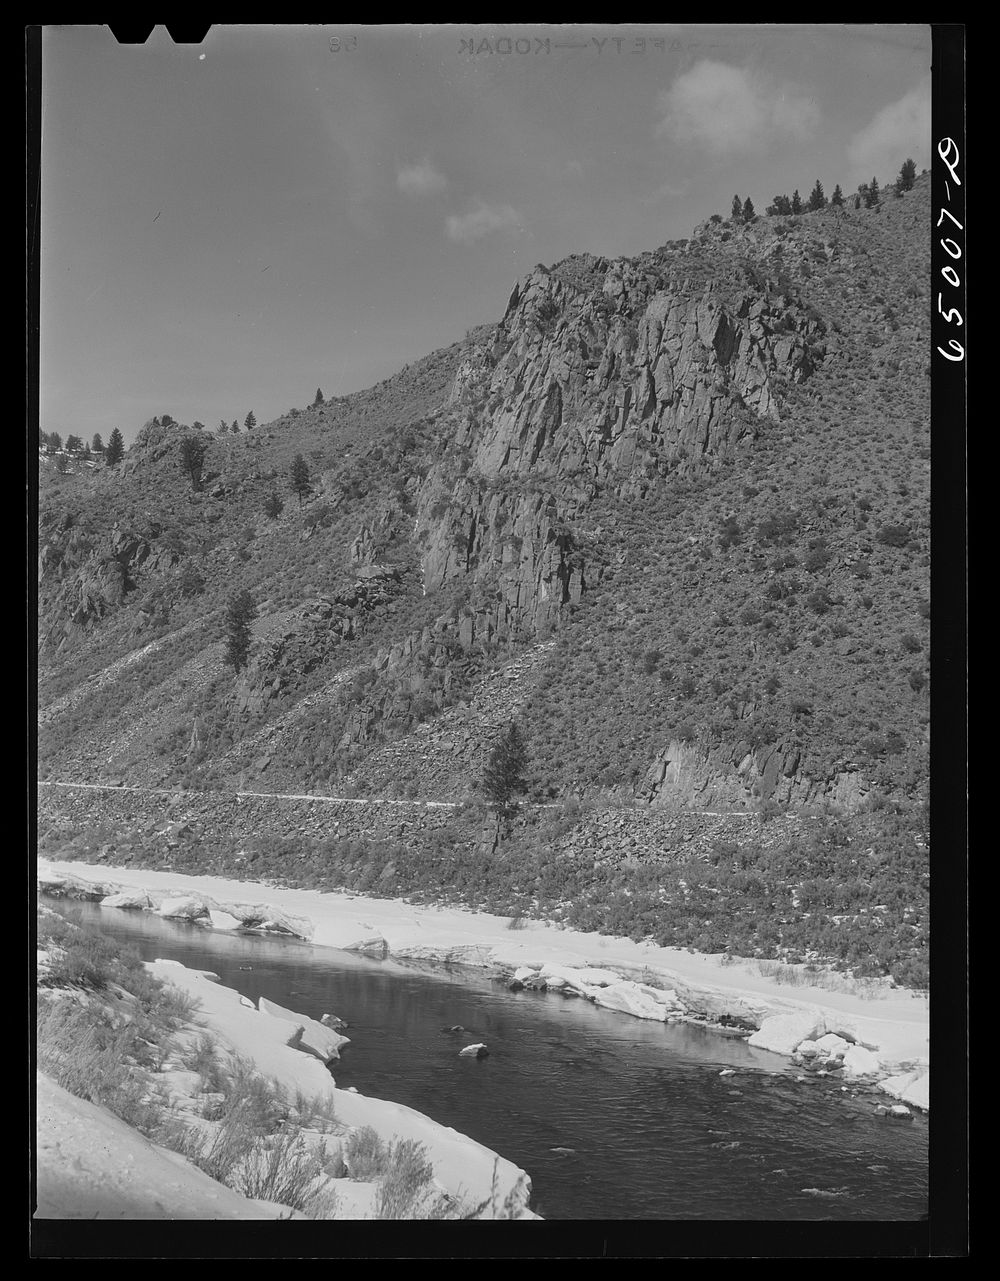 [Untitled photo, possibly related to: Beaverhead County, Montana. Ice and snow melting along the Big Hole River]. Sourced…